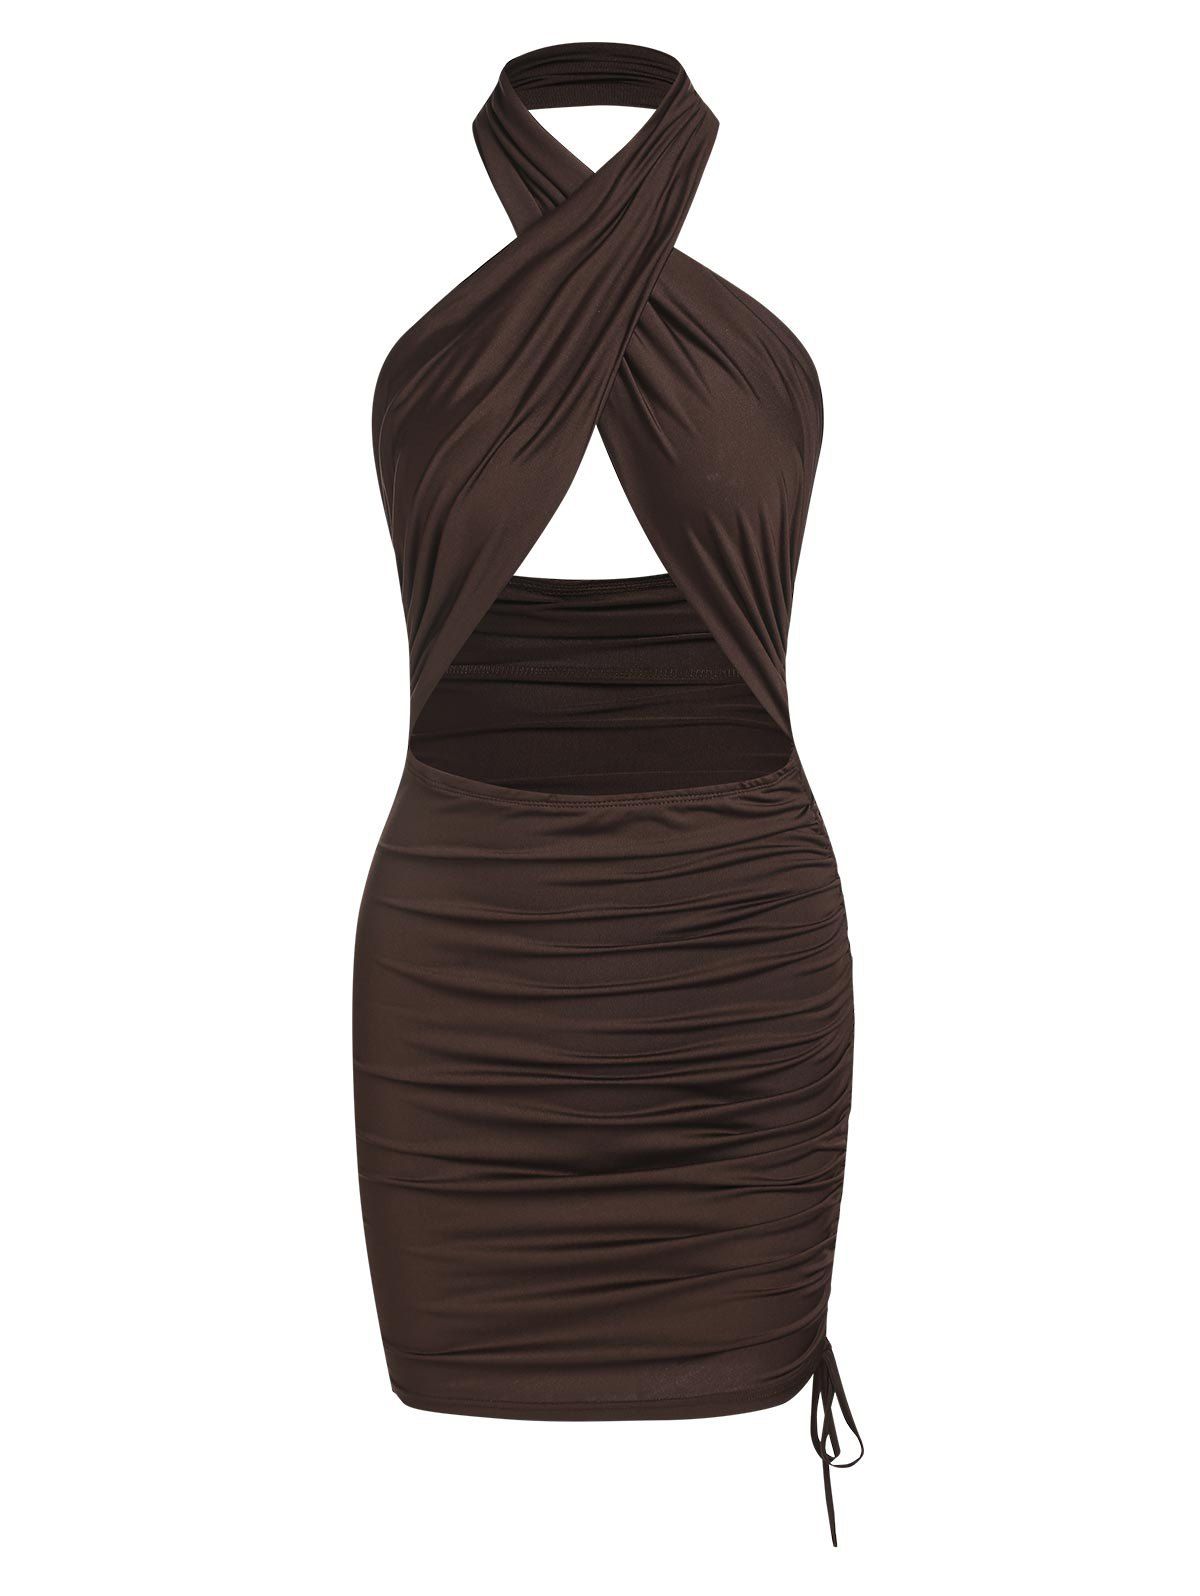 Crossover Cutout Ruched Mini Dress - DEEP COFFEE L